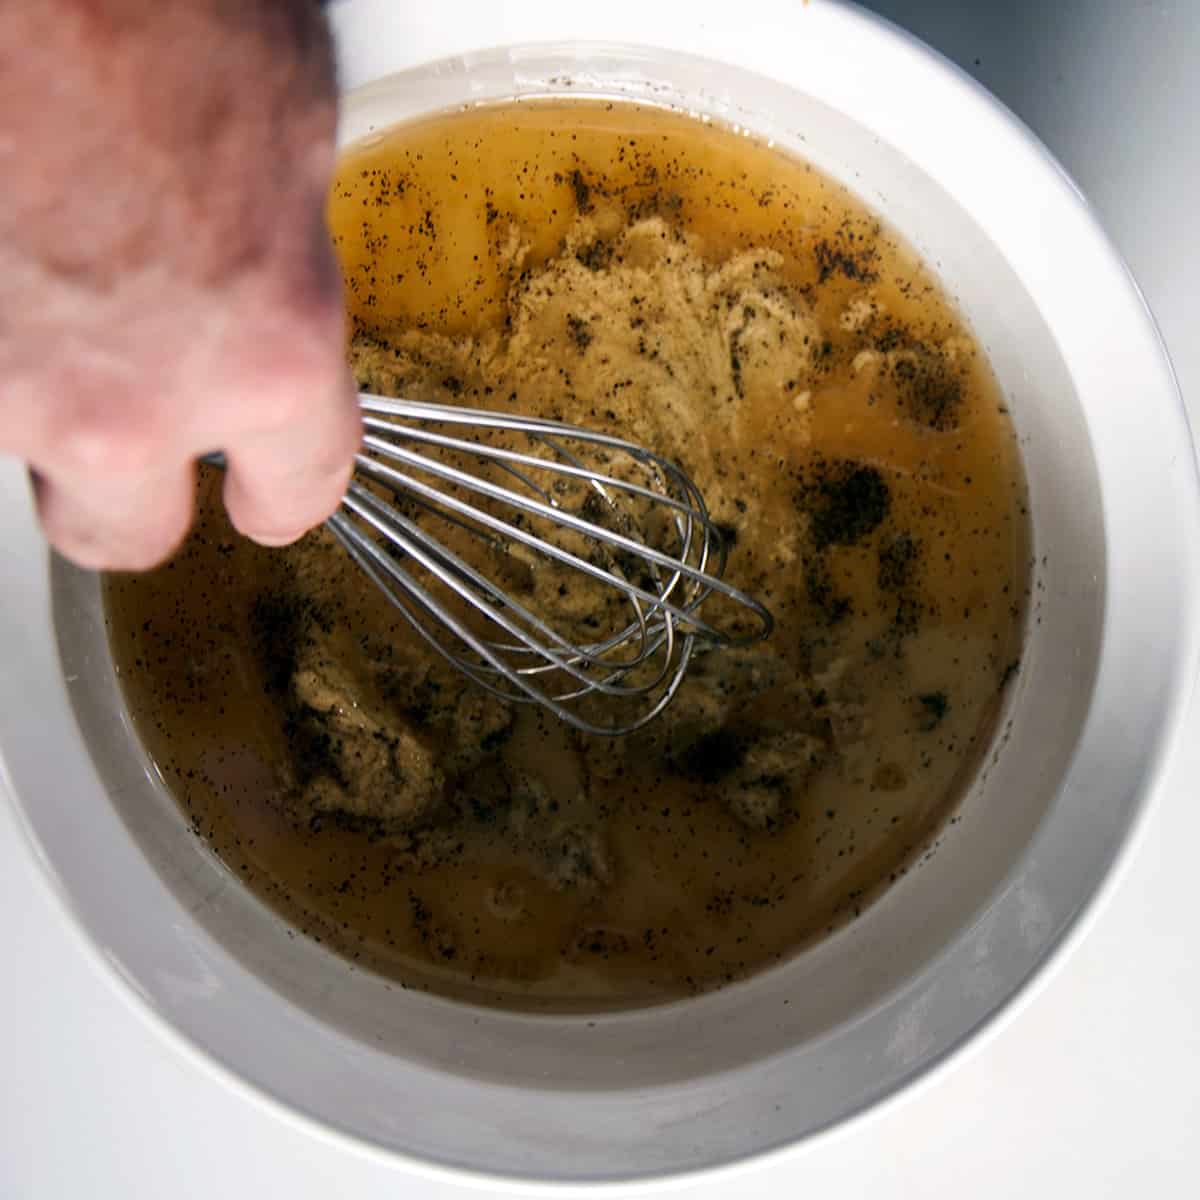 Wet ingredients being whisked in a white bowl.